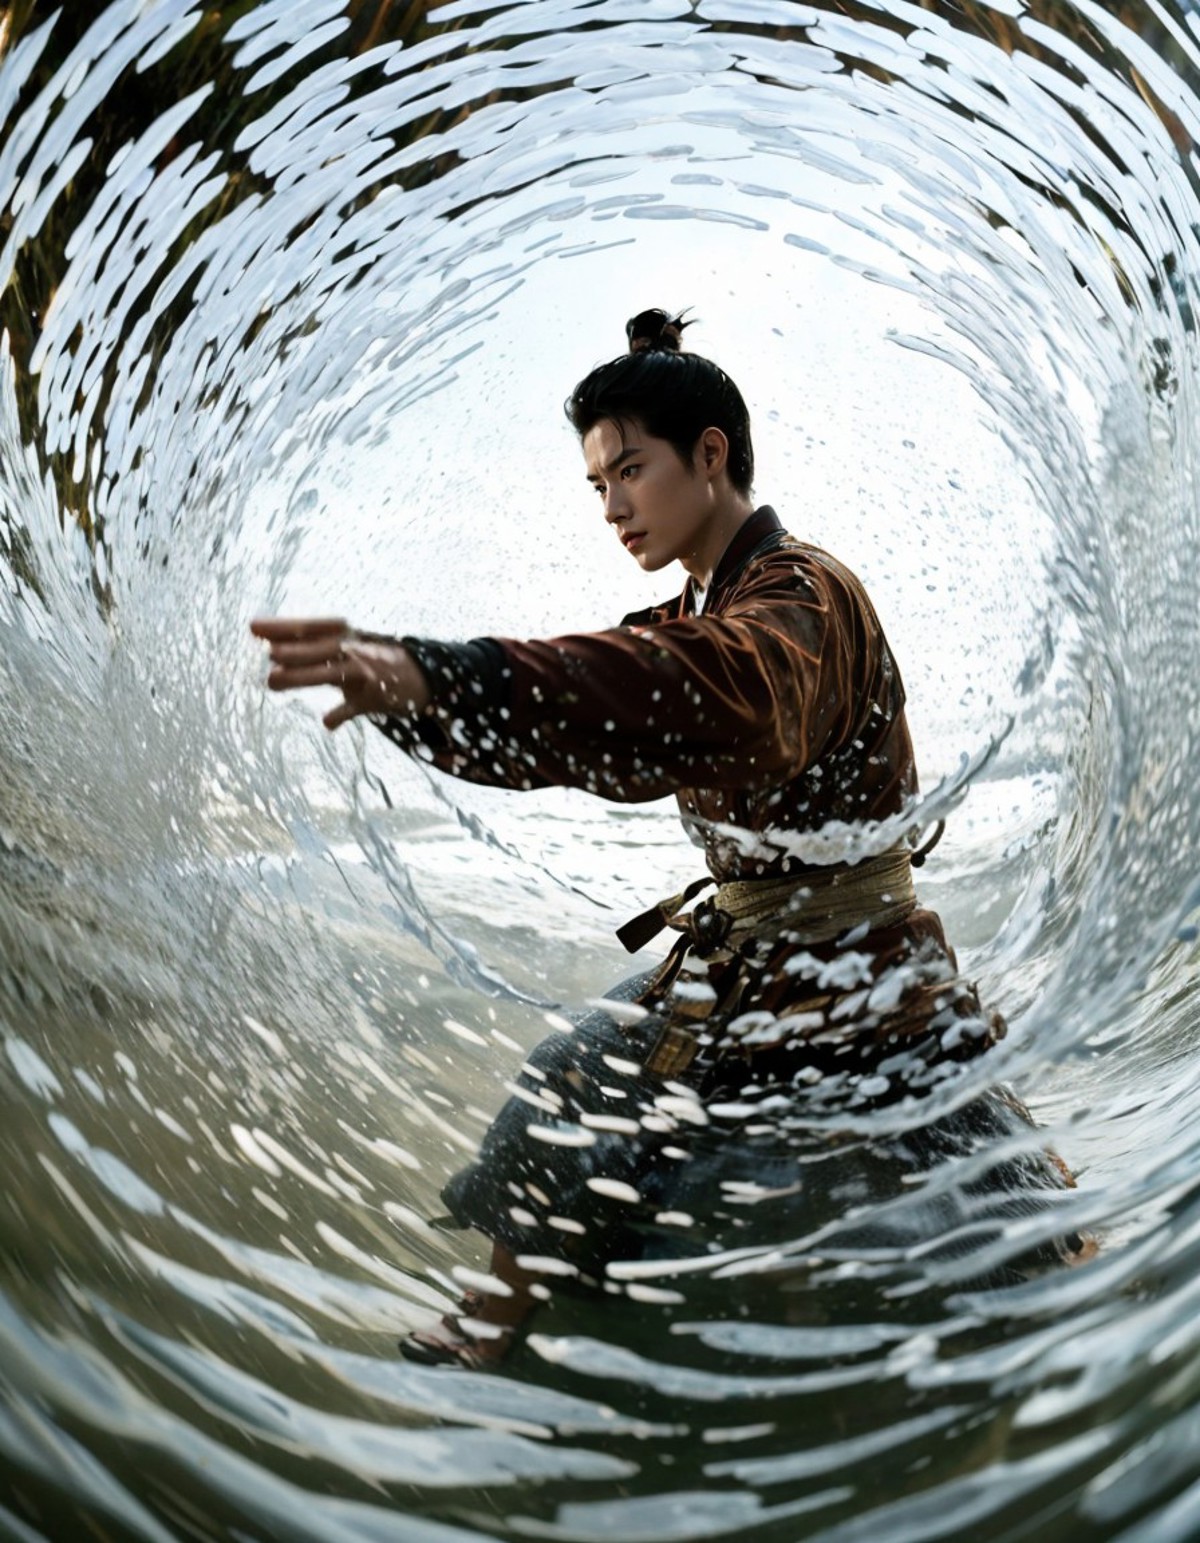 A man in a kimono surfing a wave in the ocean.